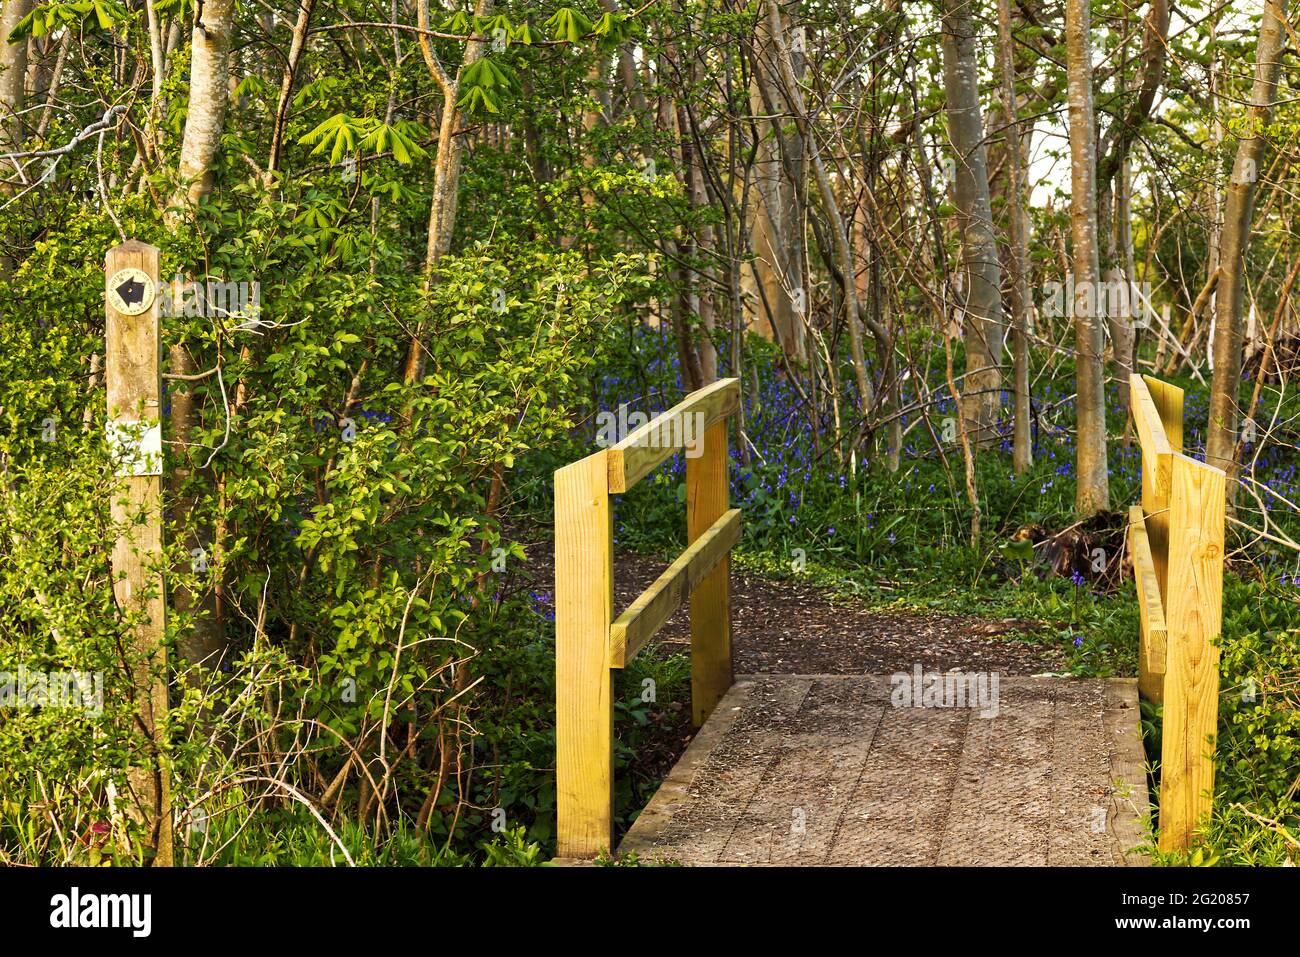 Bridge and footpath sign marking the entrance to woods with bluebells in bloom - springtime, Sharnbrook, Bedfordshire, England, UK Stock Photo